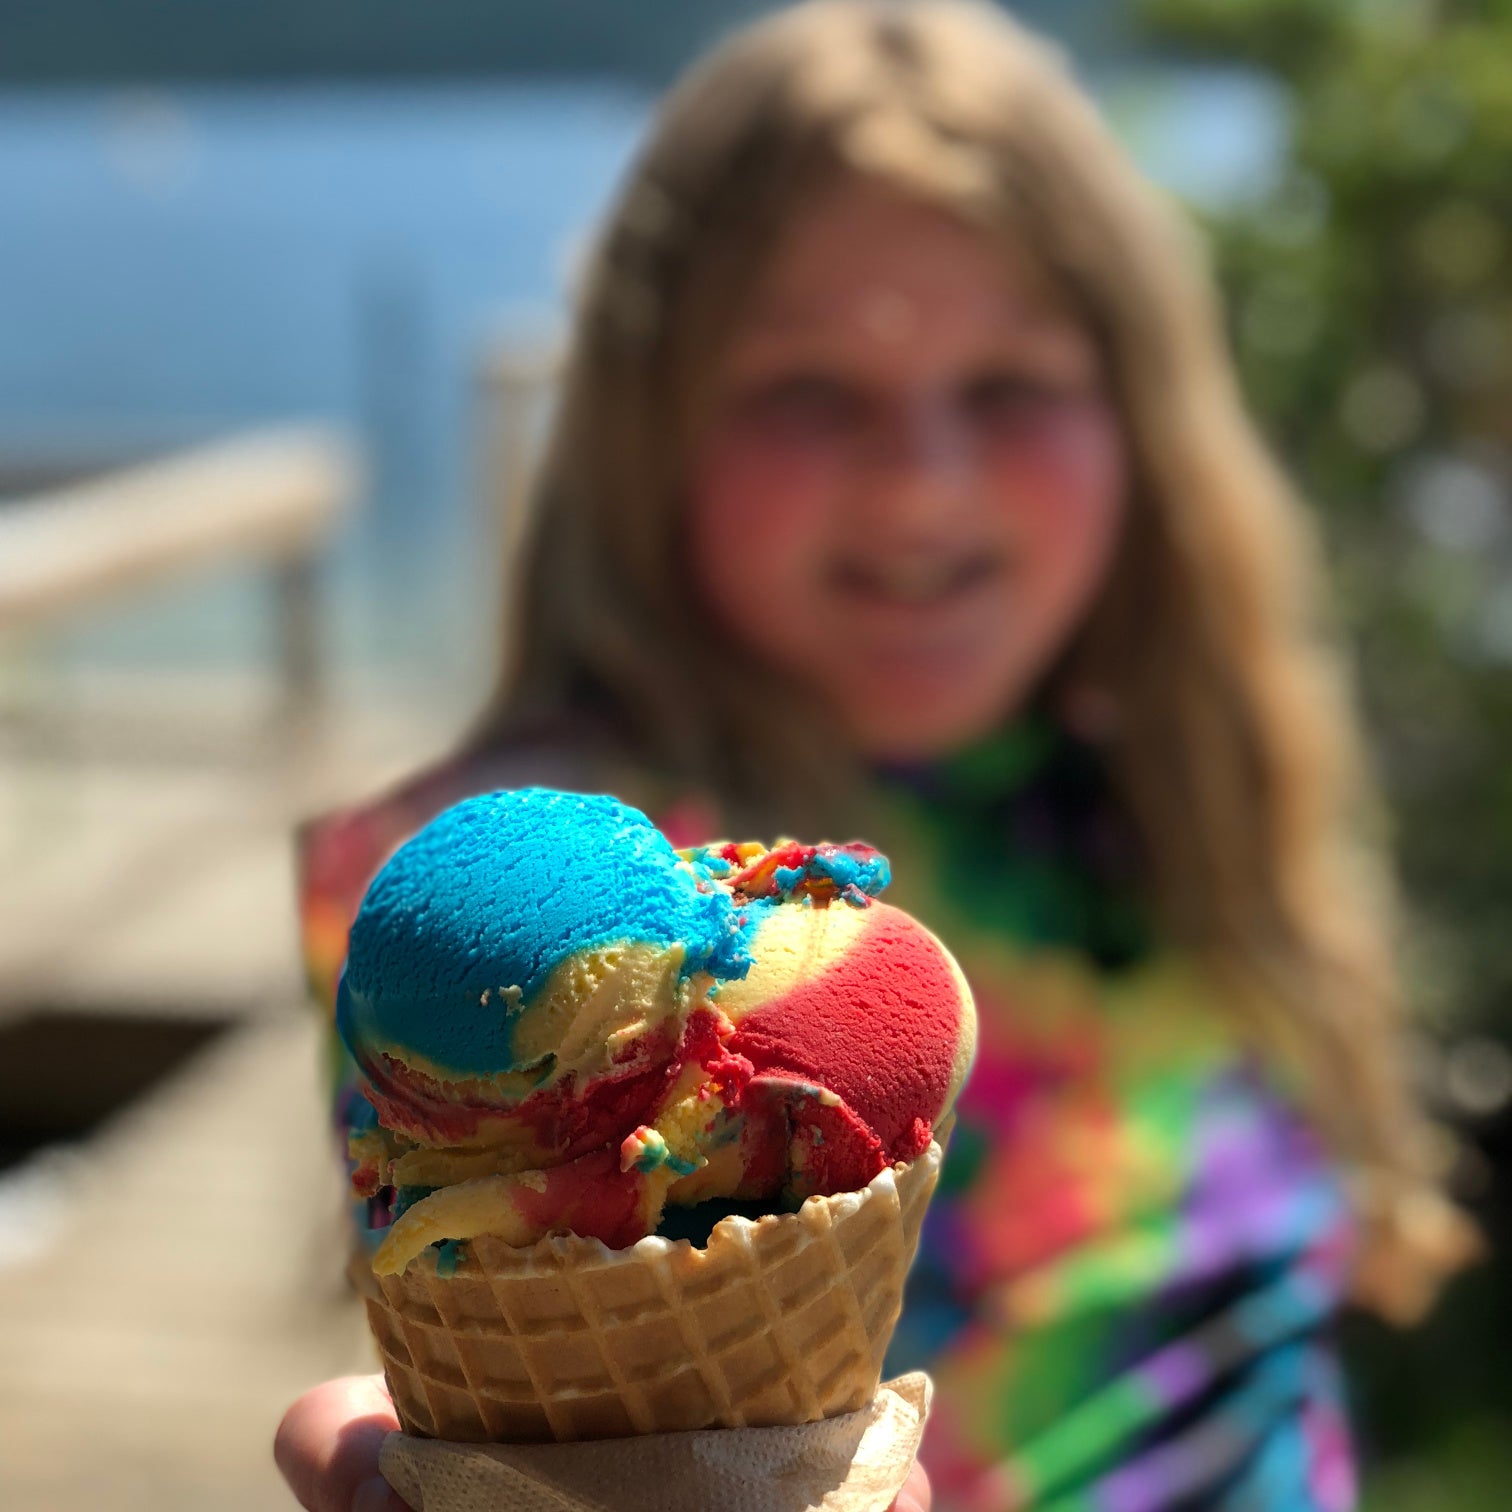 The 19 best spots for ice cream around Shuswap Lake - 2021 update